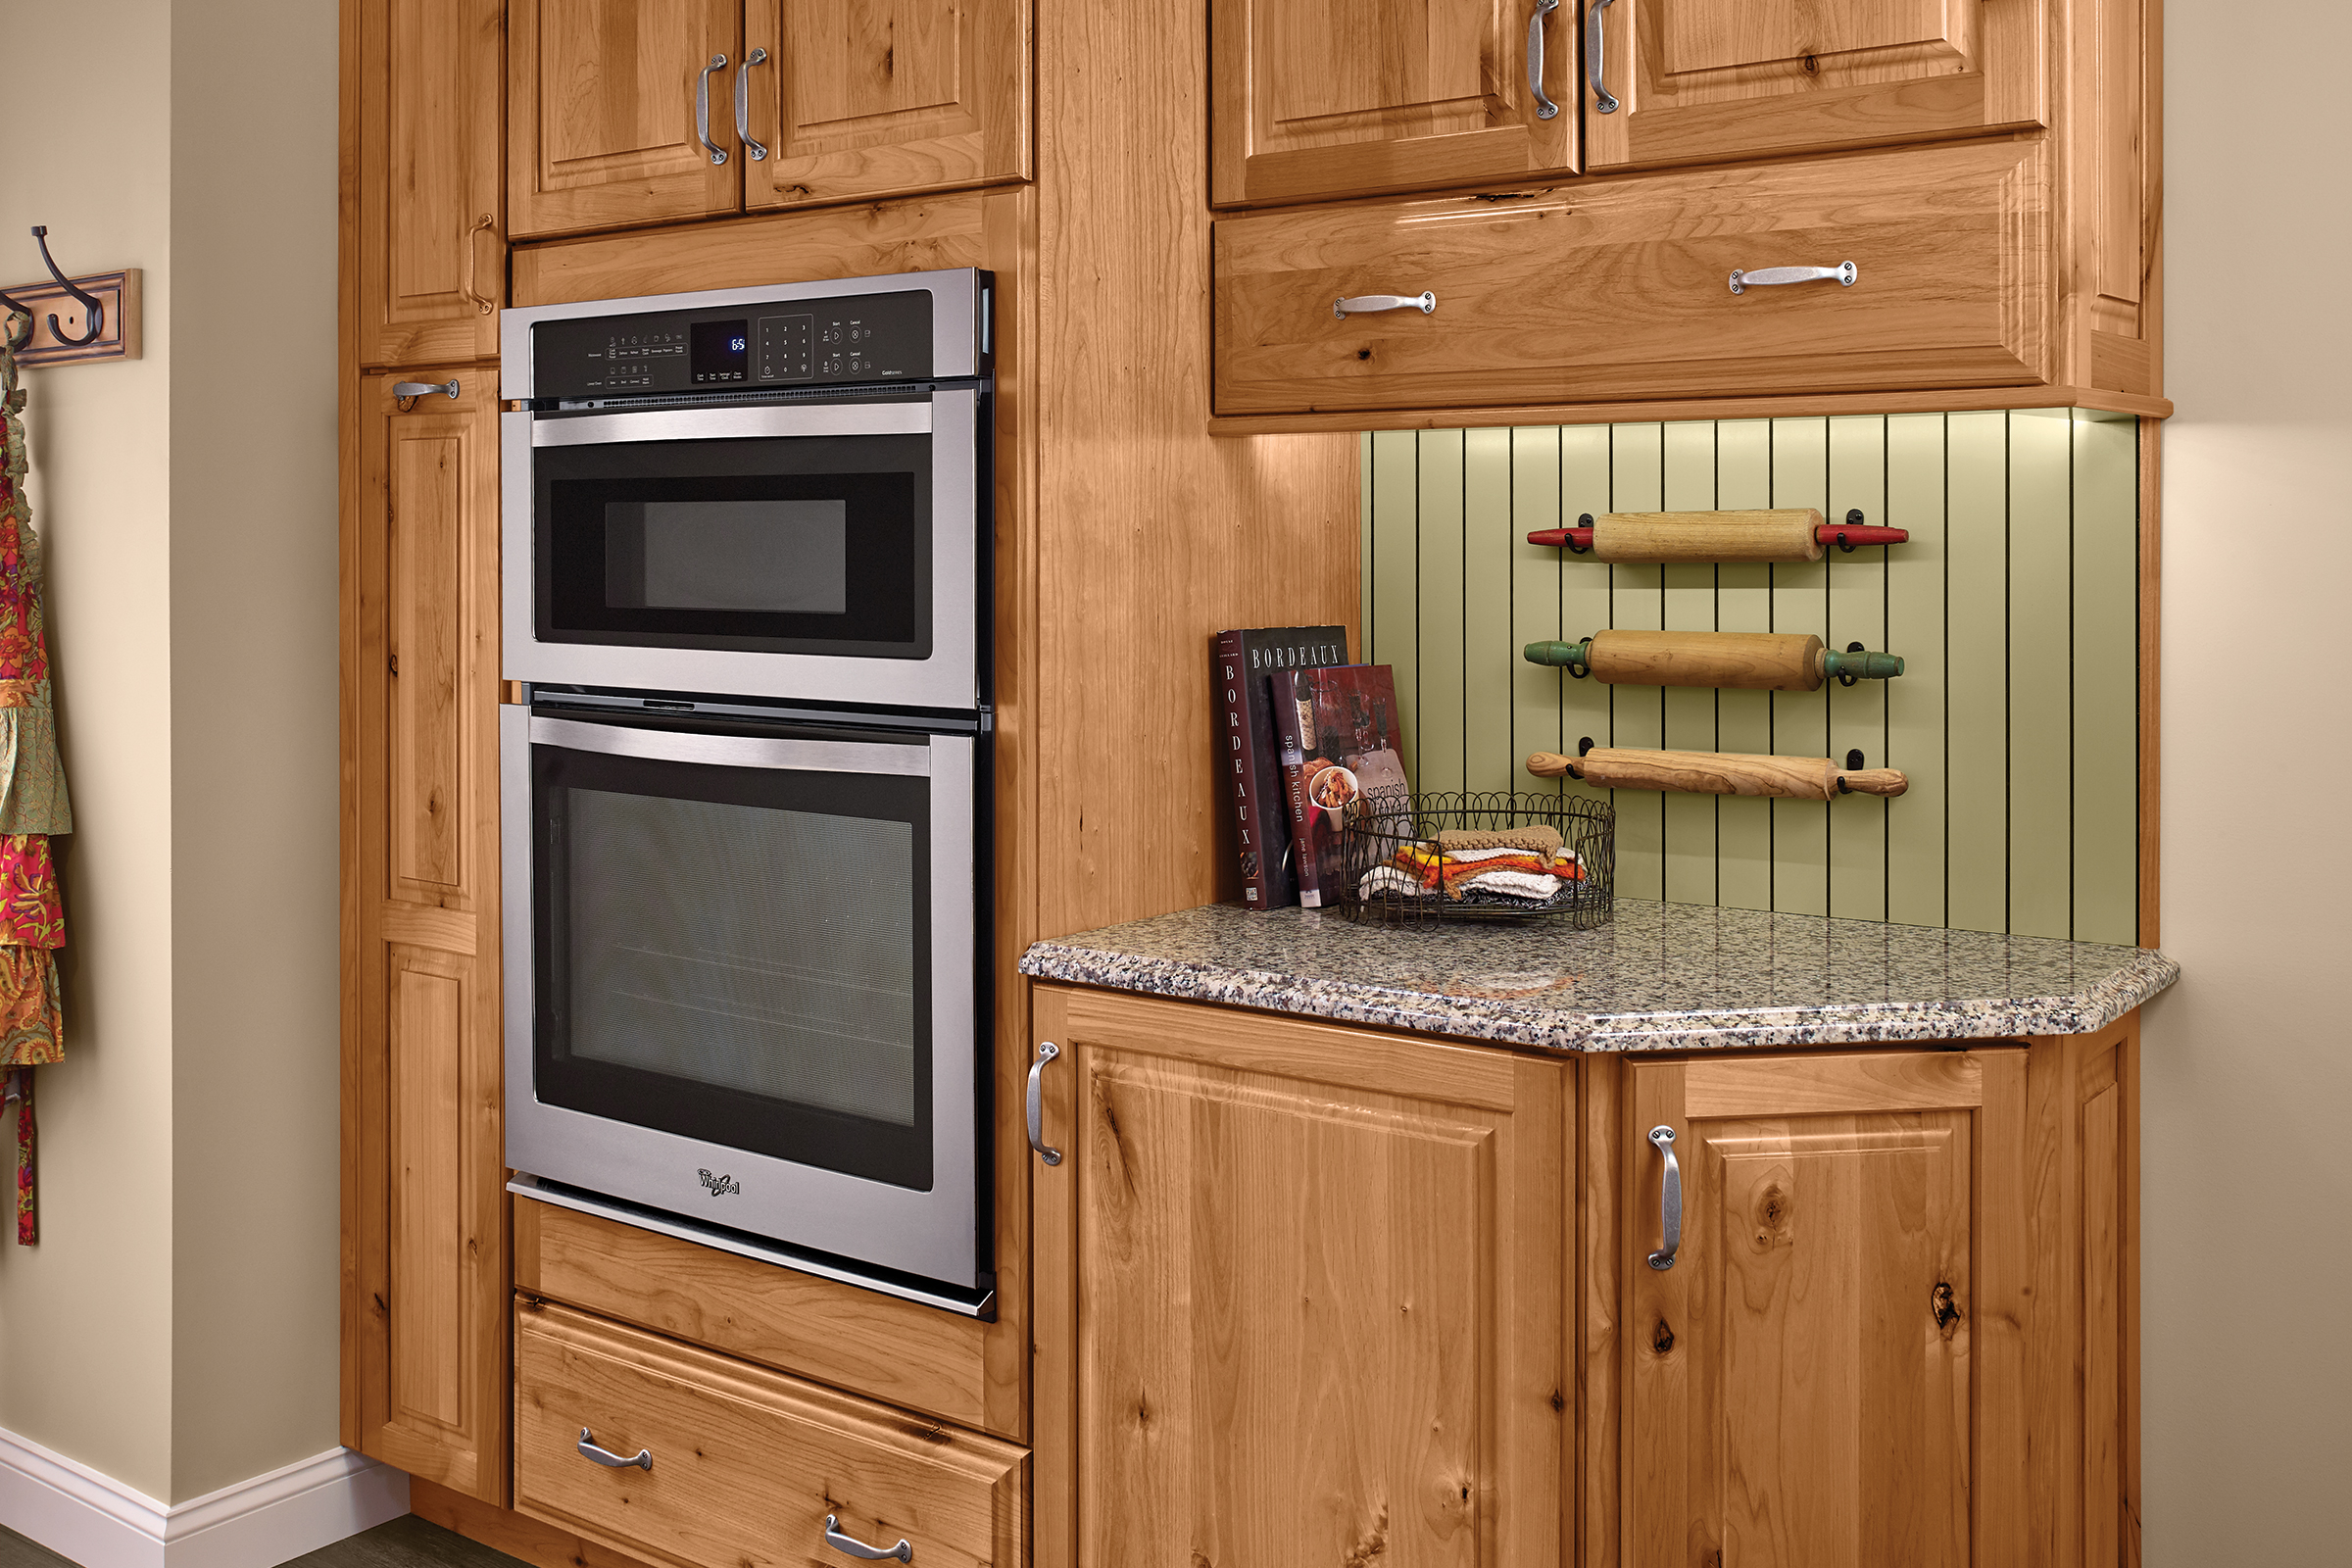 Cooking workstation anchored by a tall KraftMaid wall-oven cabinet in Rustic Alder with a Natural finish